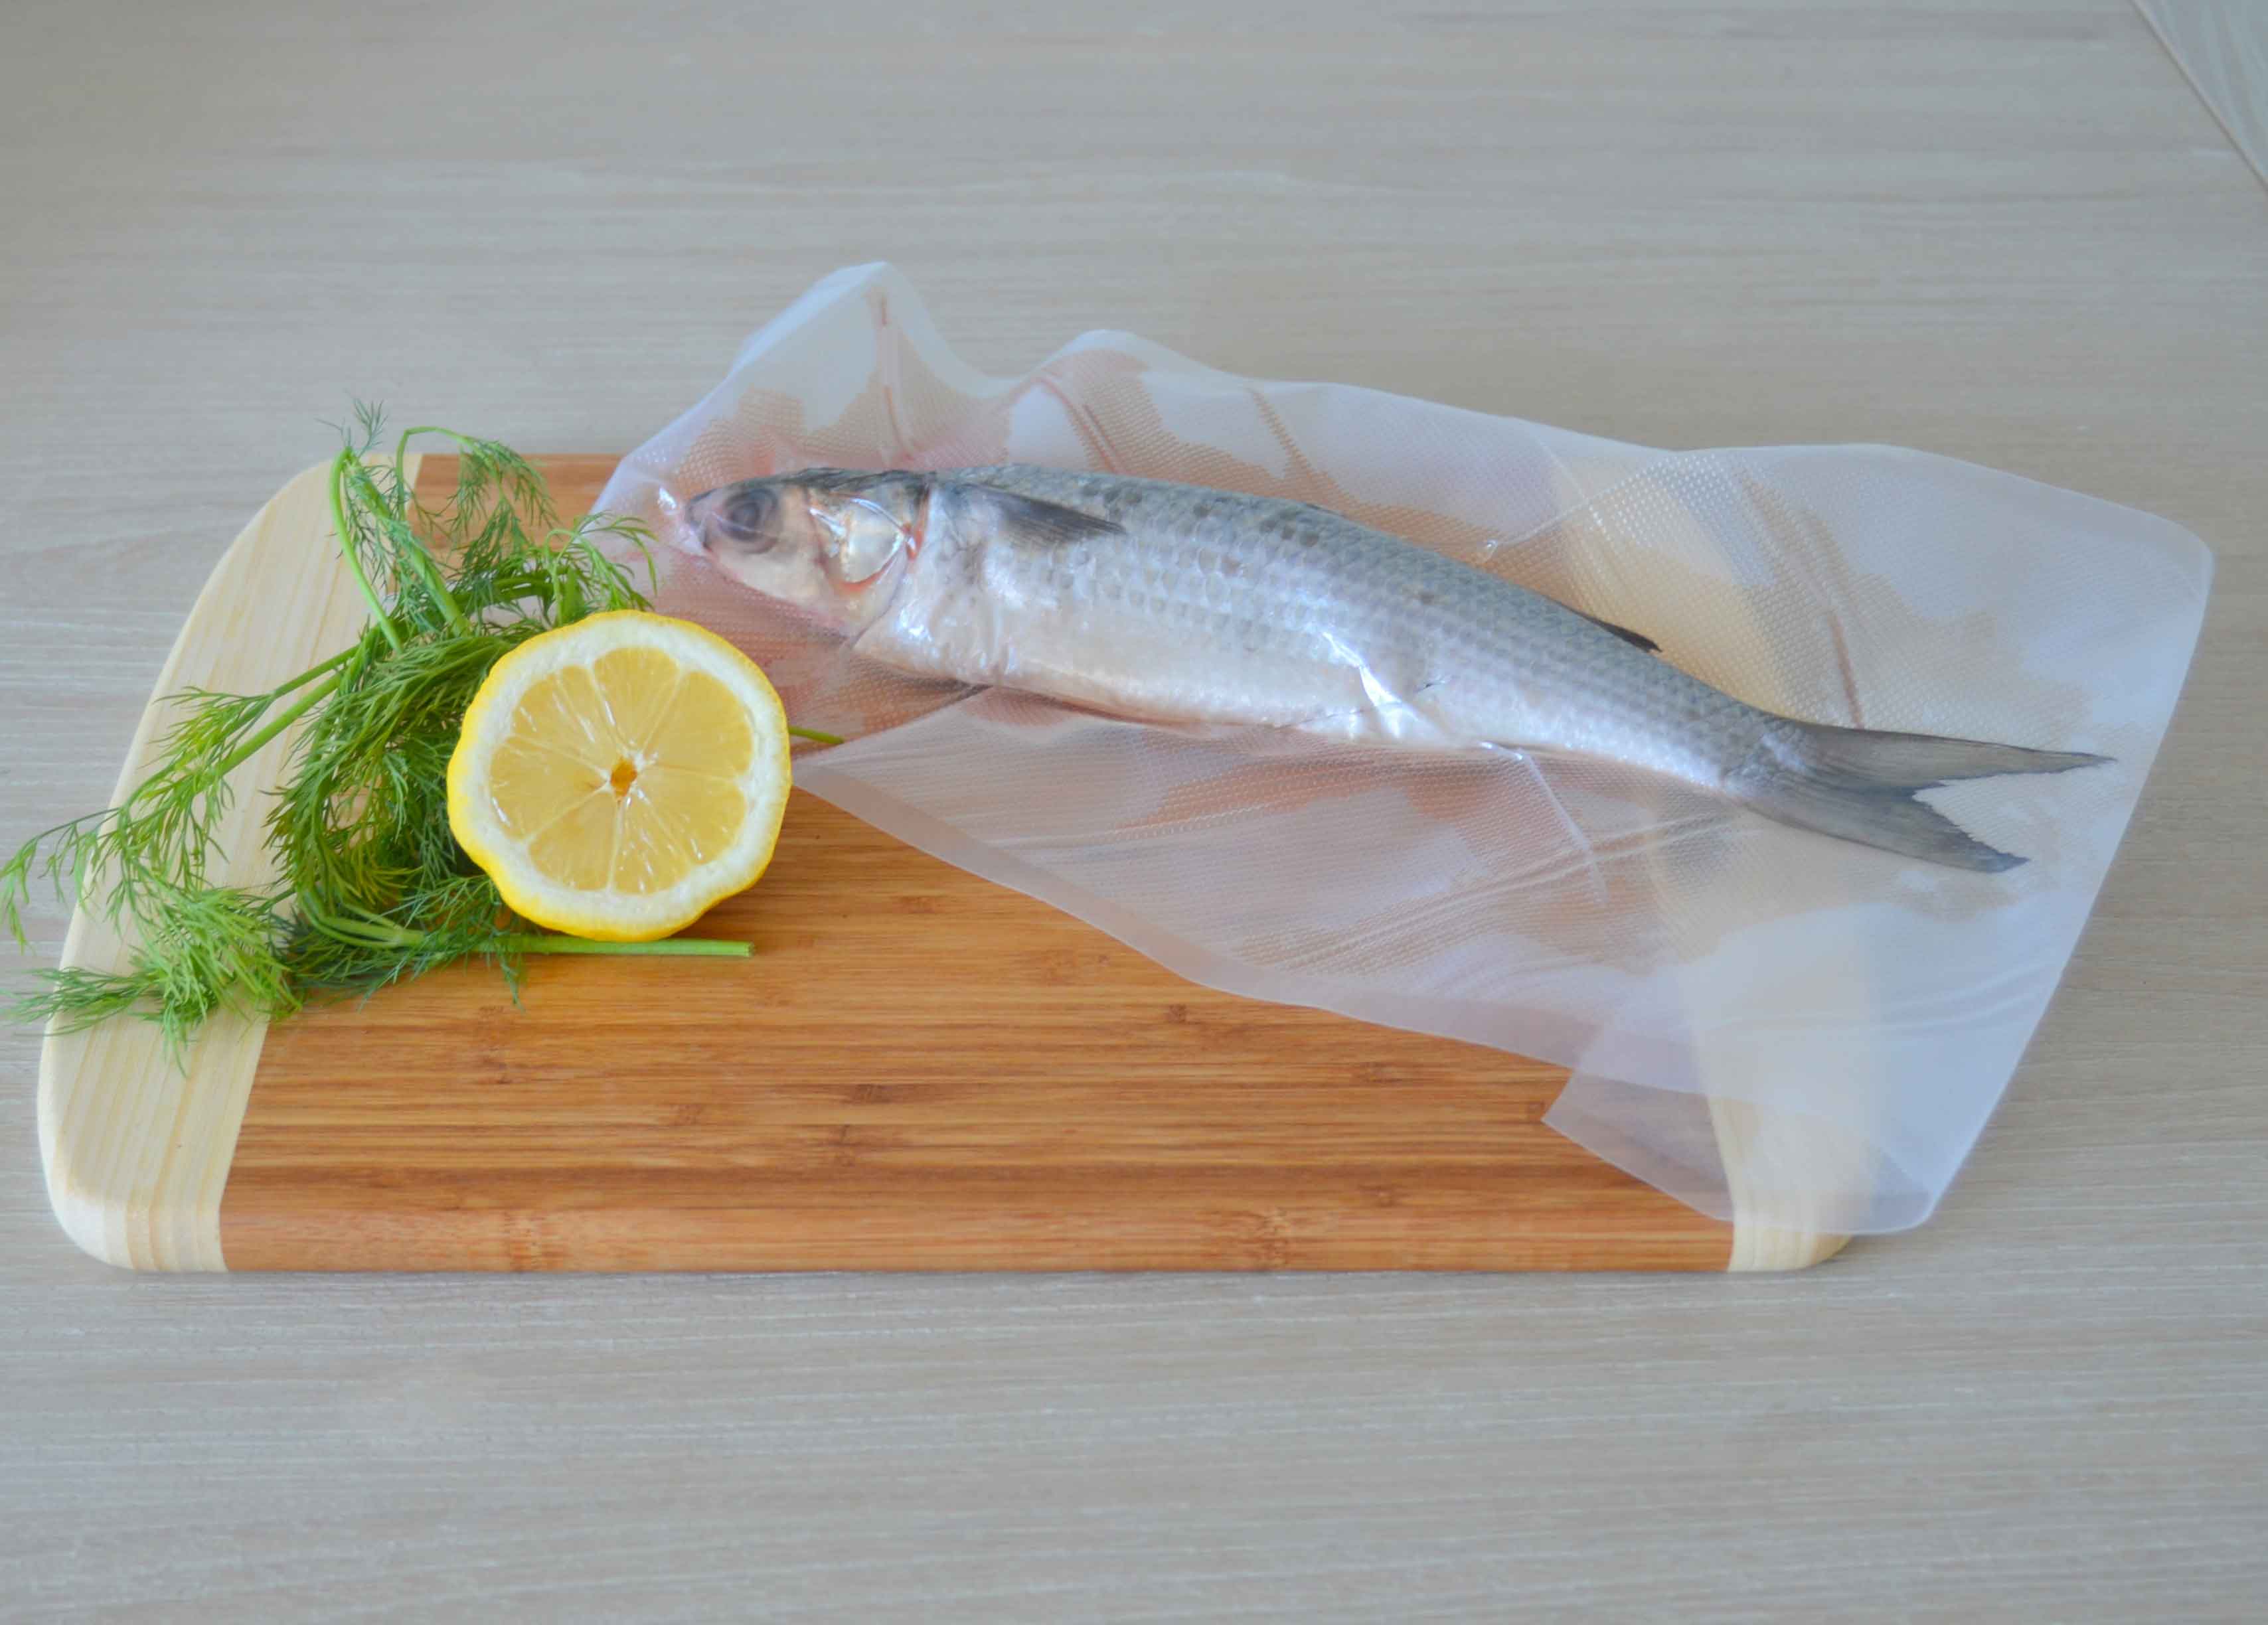 Vacuum sealing fish - all you need to know about keeping your catch fresh